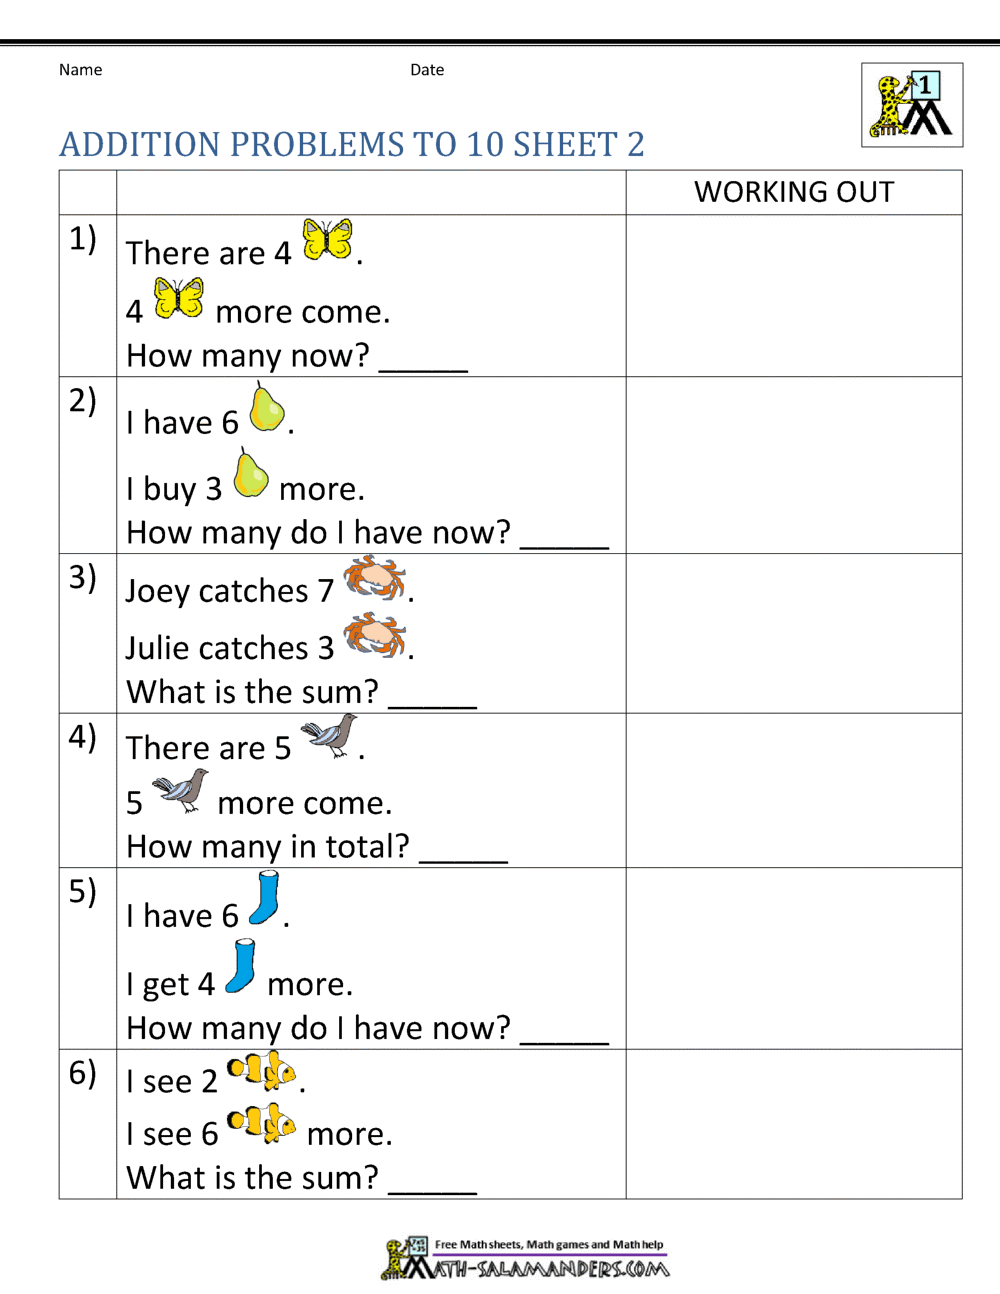 Word meaning problem. Word problems 1 Grade. Word problems for Kids. Math problems in English. Tasks for Grade 1.